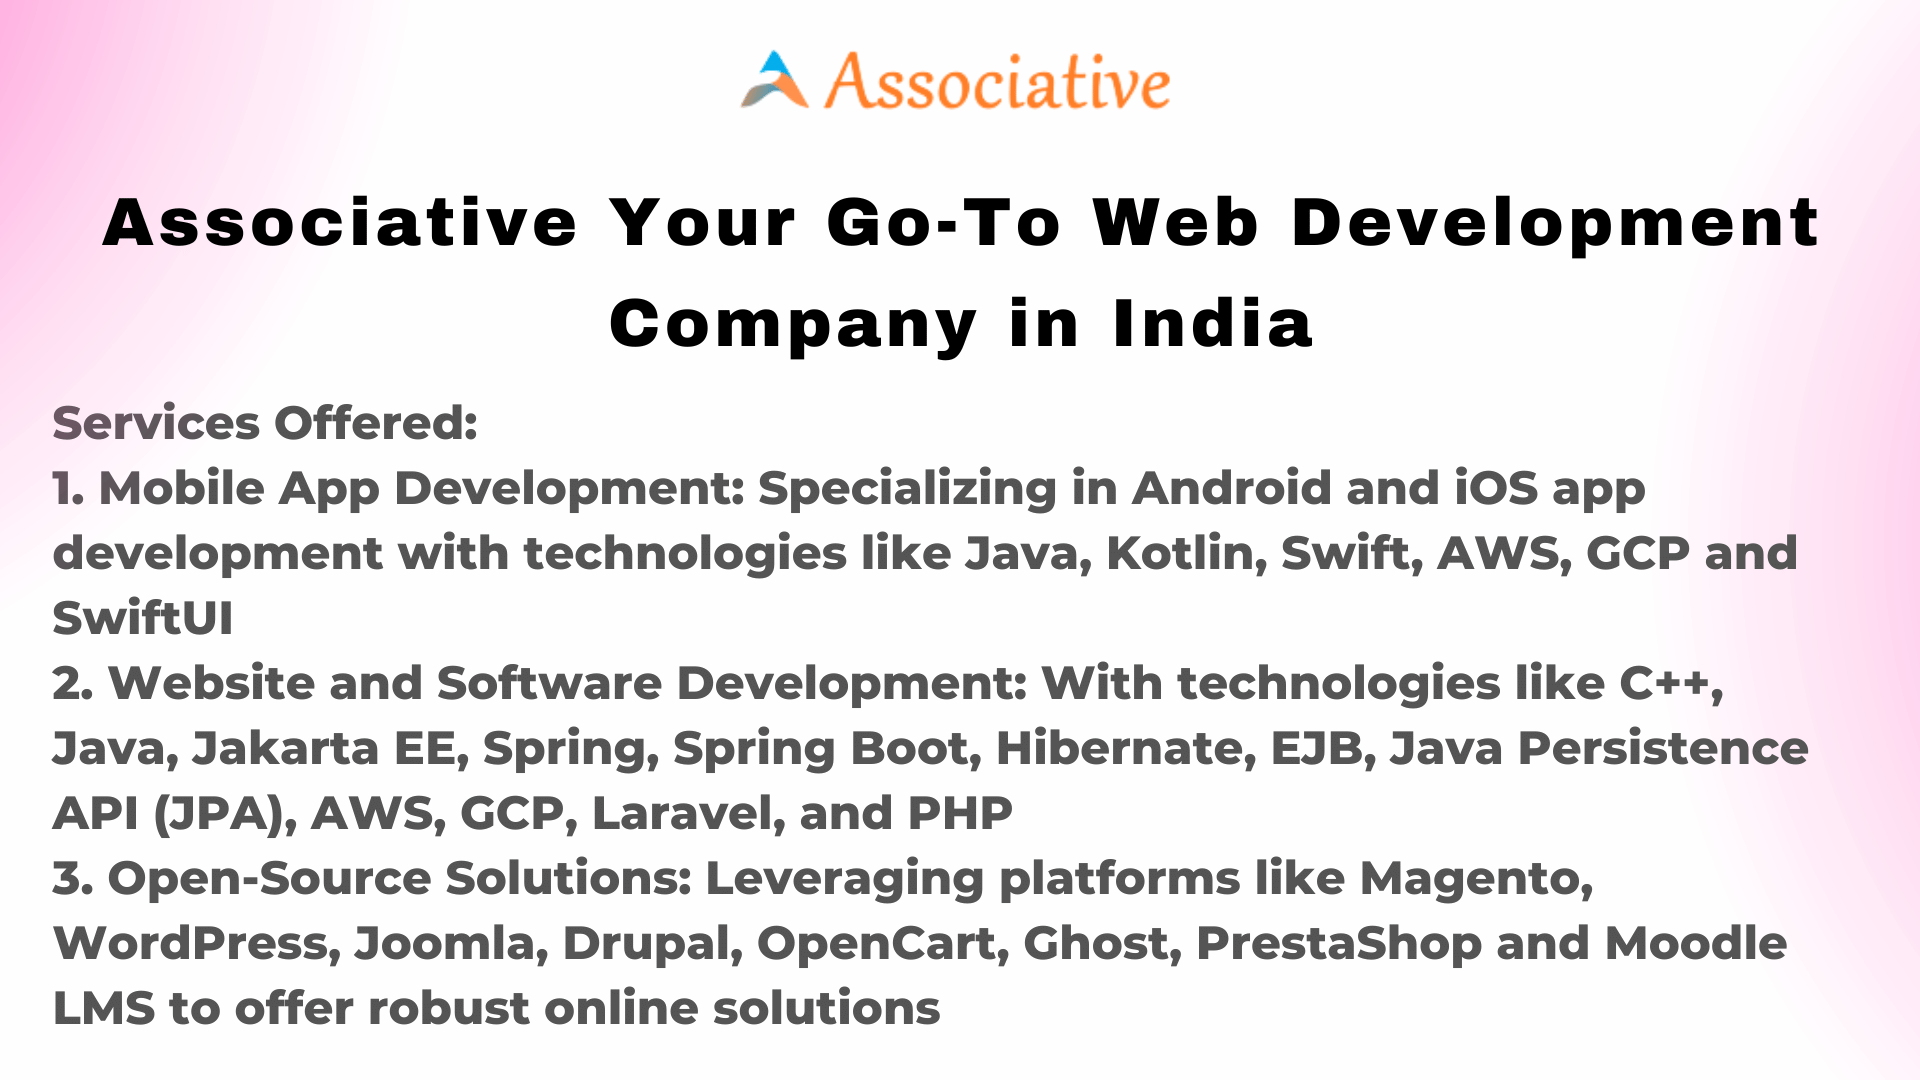 Associative Your Go-To Web Development Company in India